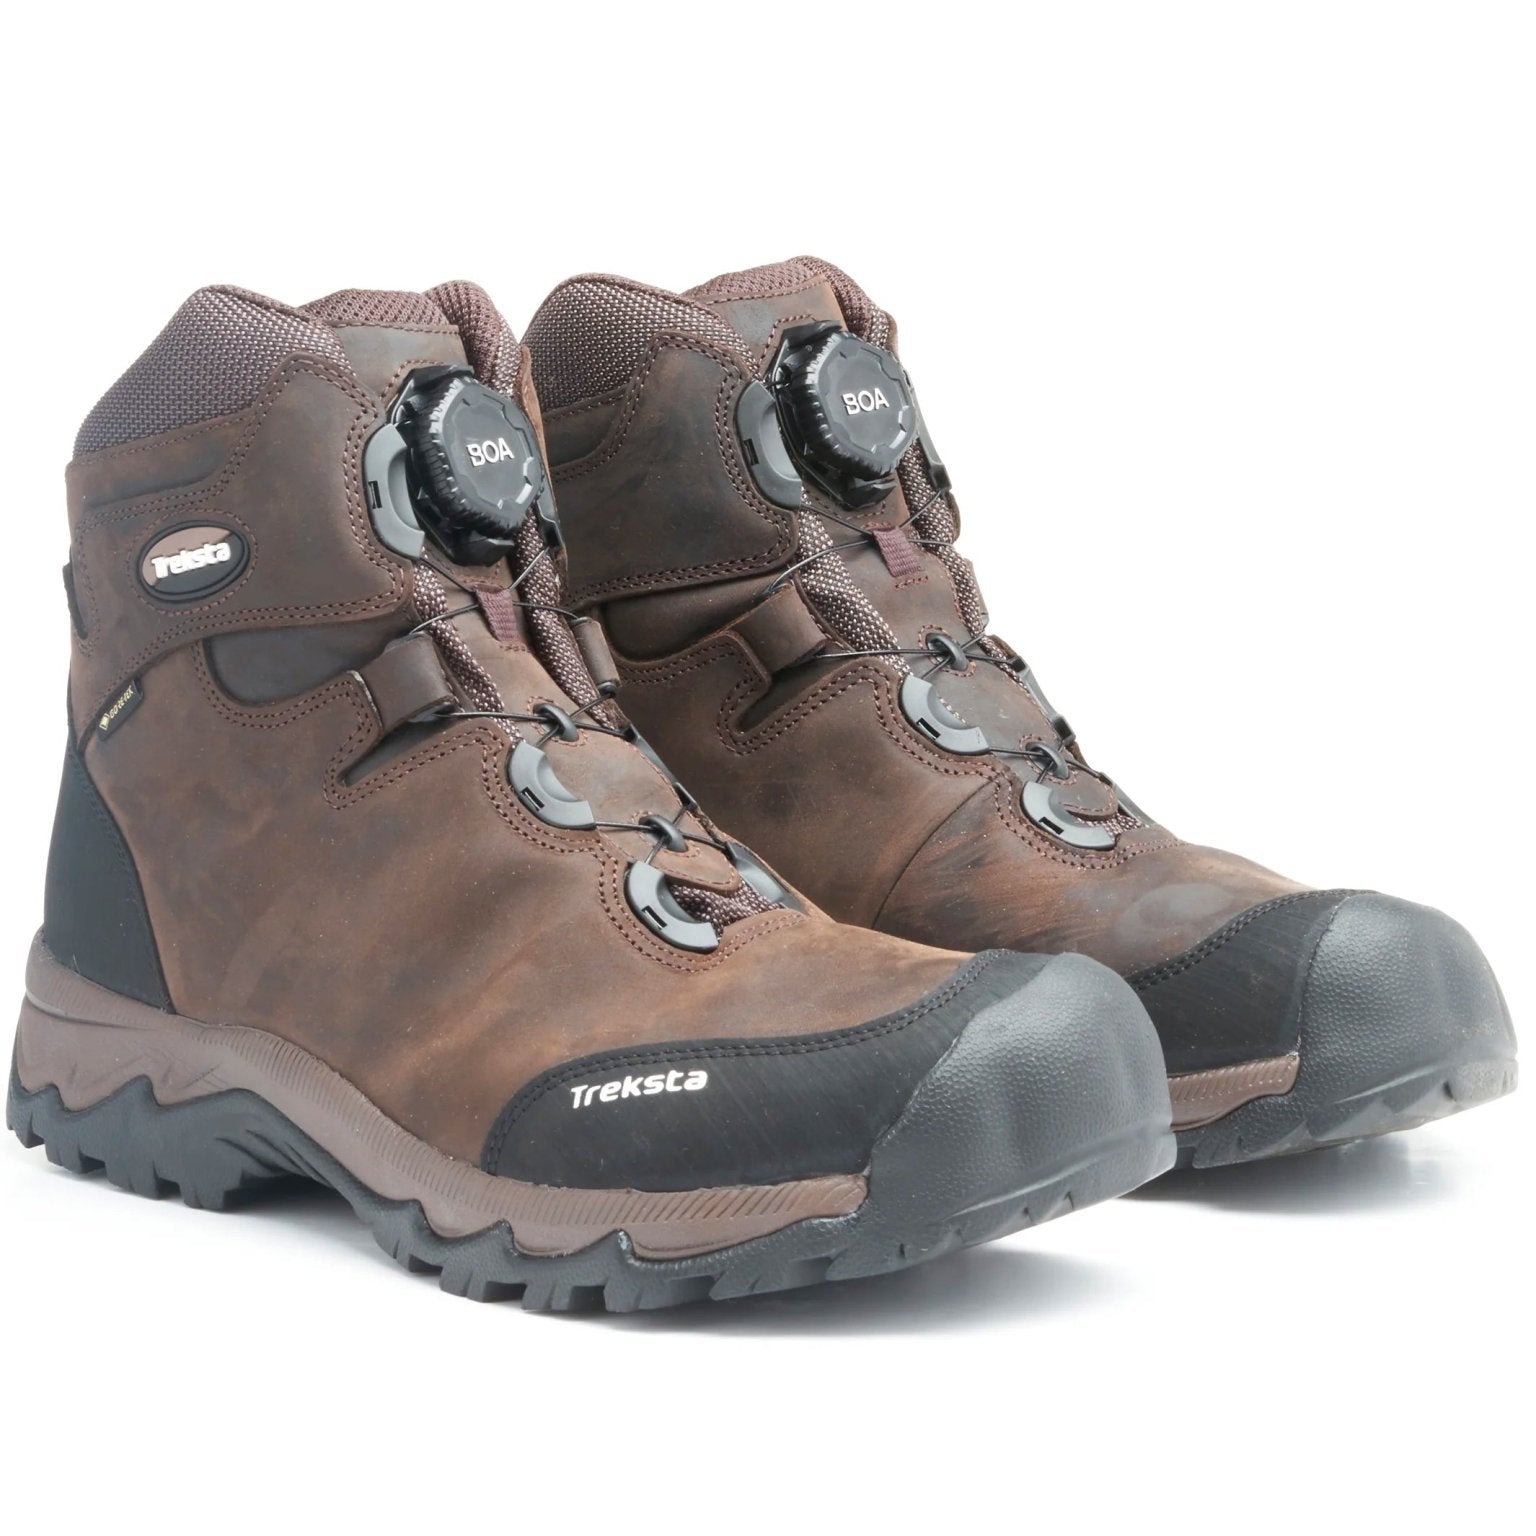 4elementsclothingTrekstaTreksta - Winchester 6" Gore-Tex Waterproof Boot, Boa Lace up system, Leather boot with Nestfit and IcelockBoots750122562251